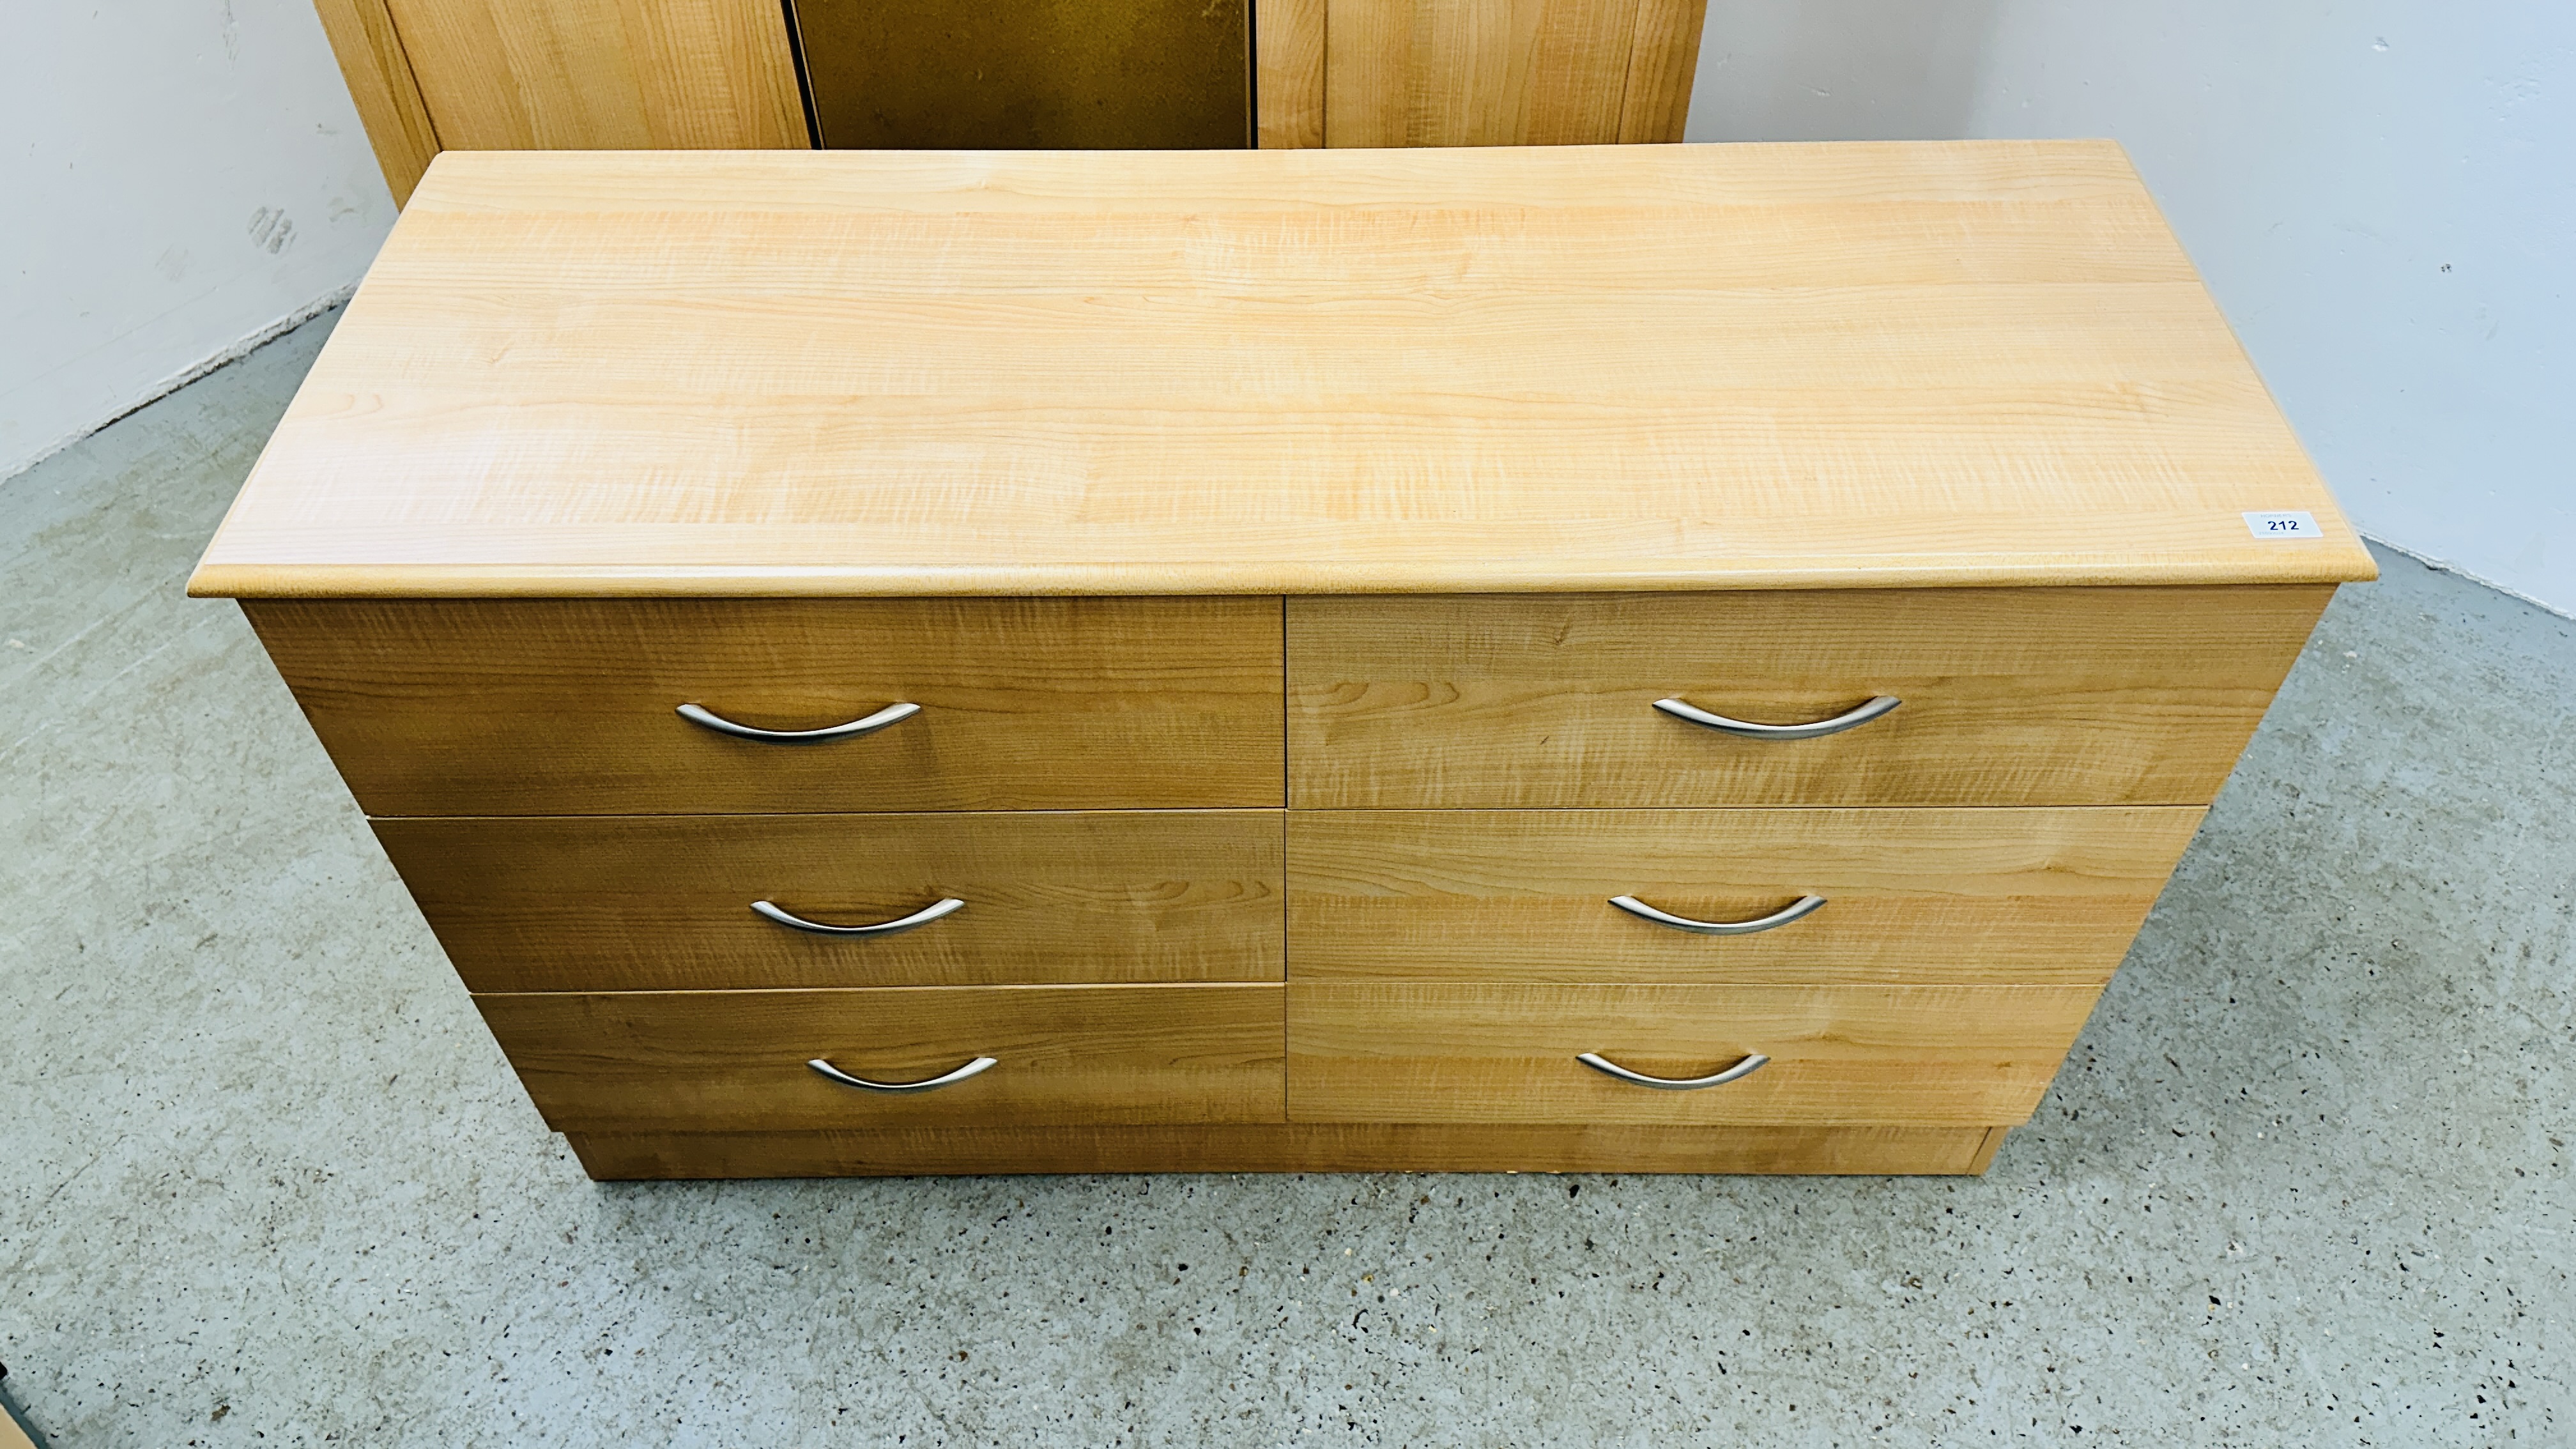 A MODERN 6 DRAWER BEECH FINISH CHEST W 122 X D 45 X H 74CM. - Image 3 of 13